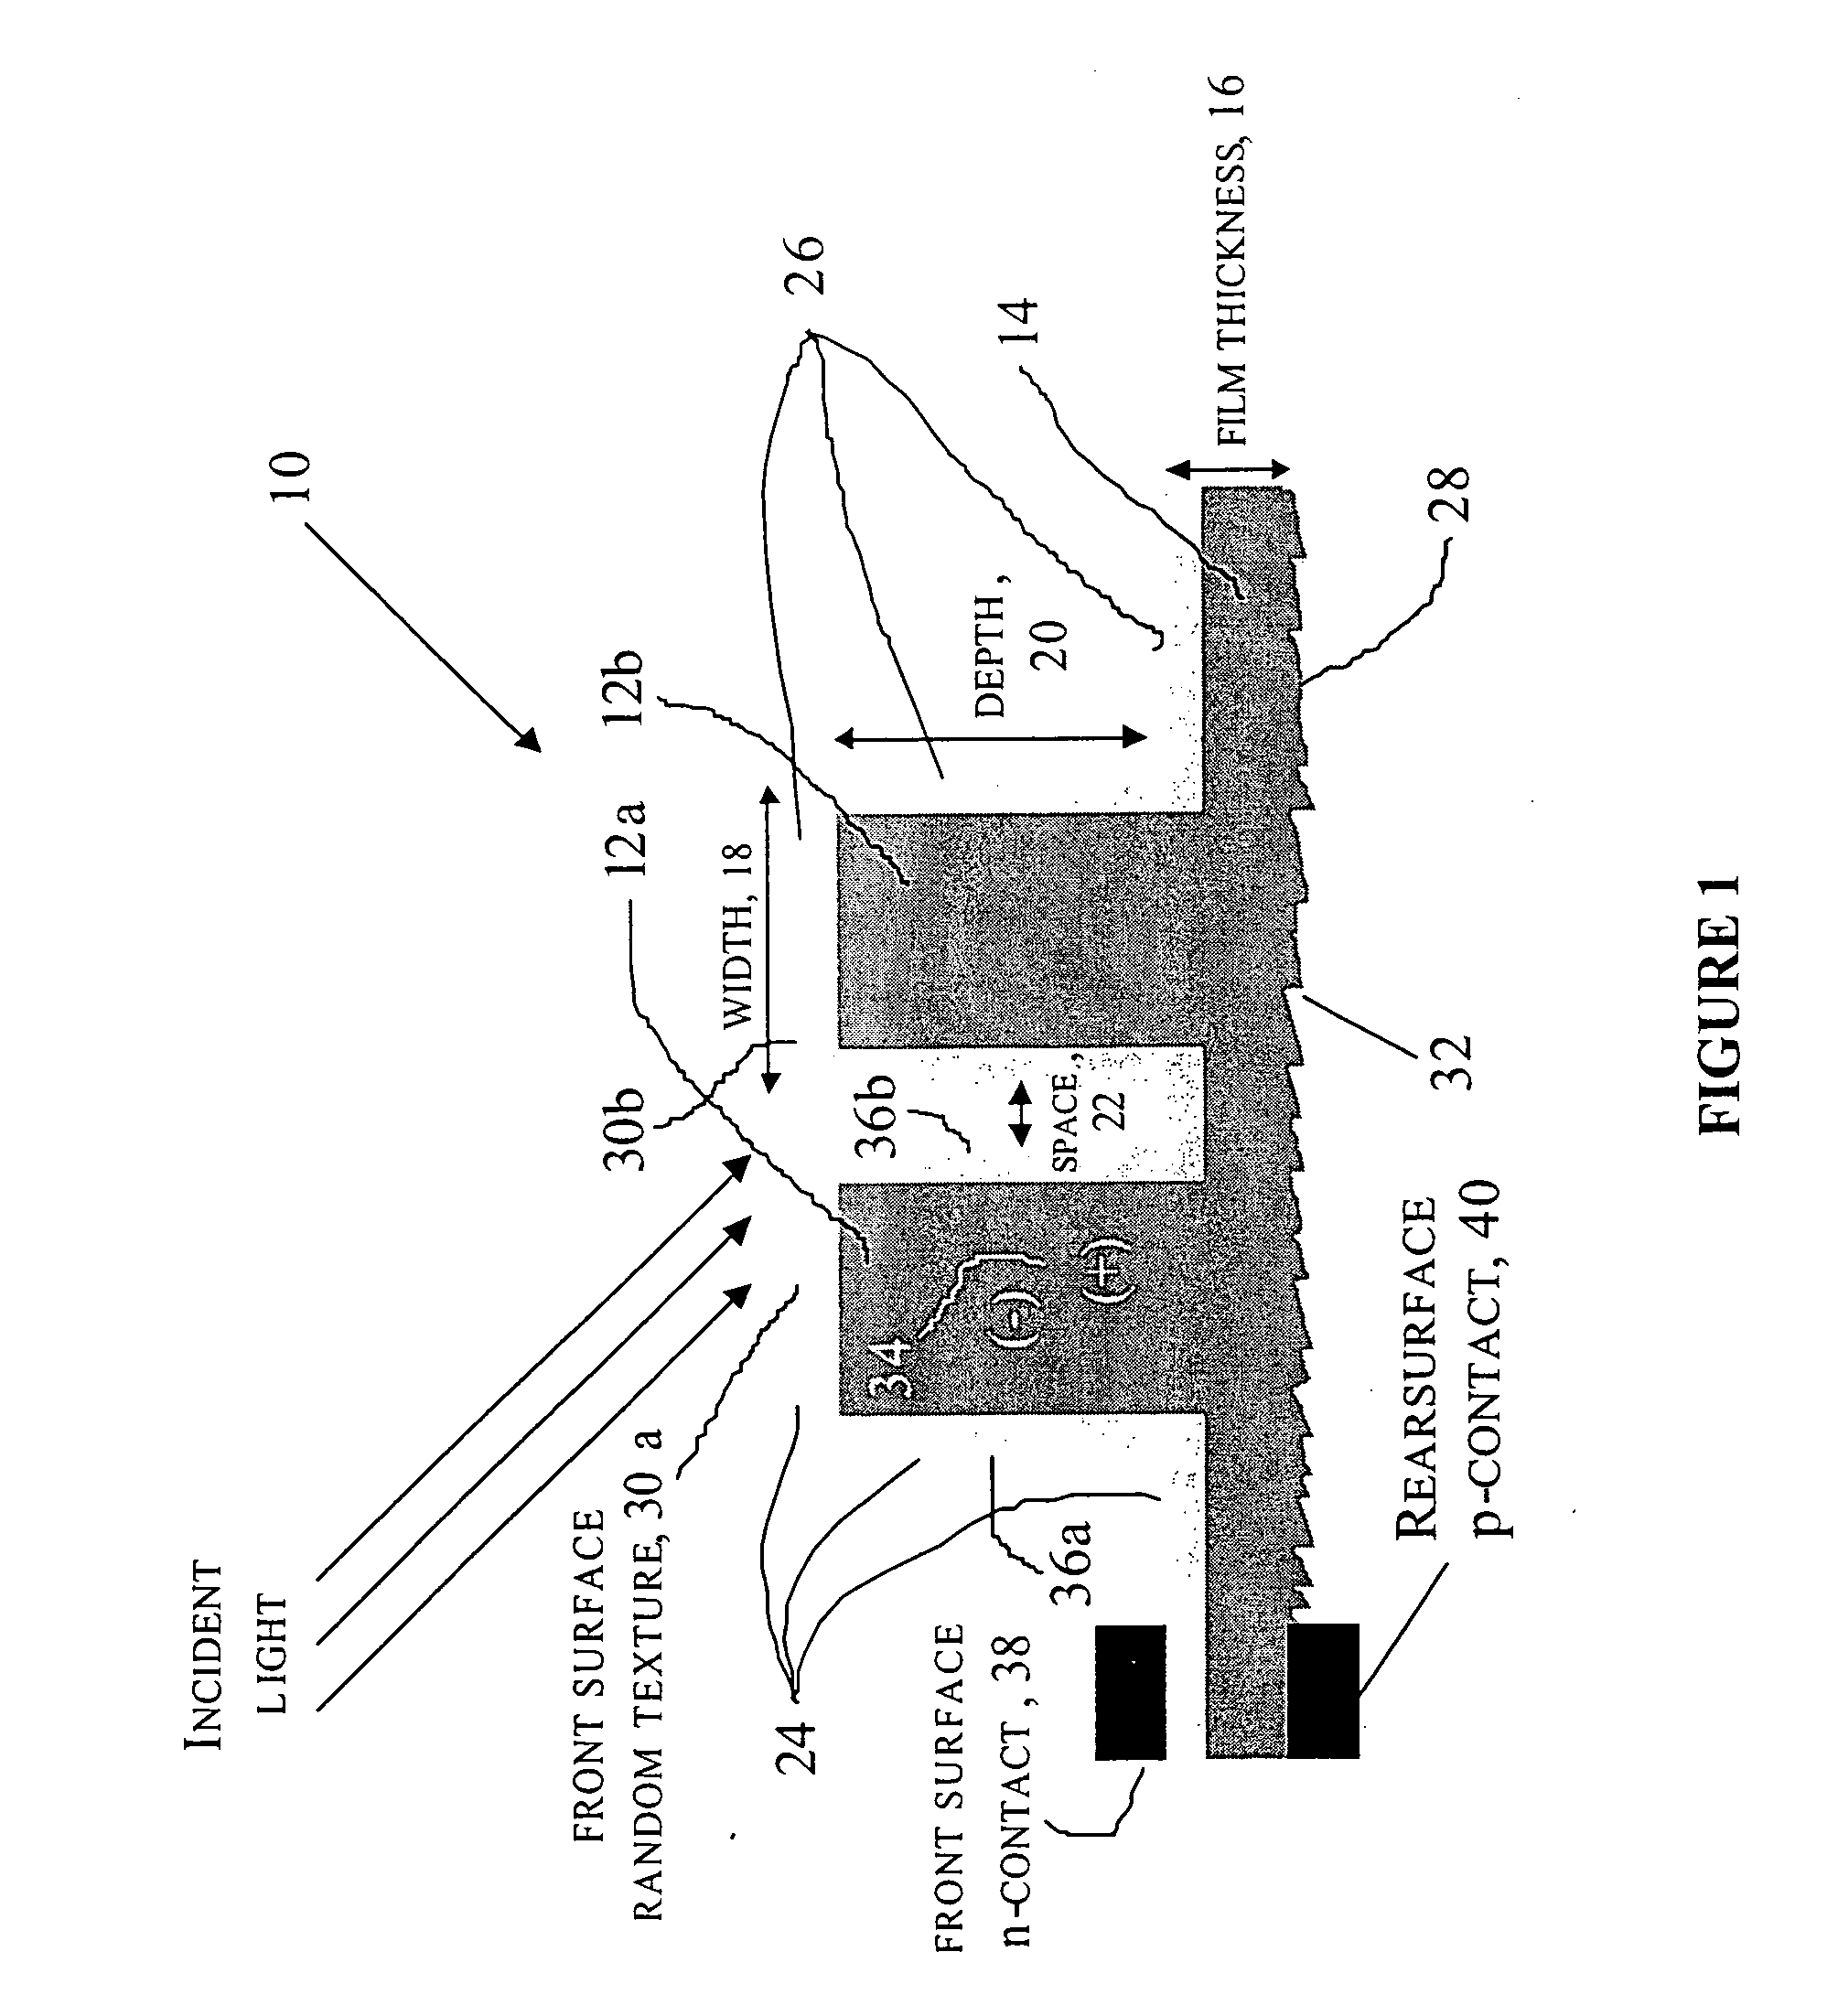 Thin-film solar cells and photodetectors having enhanced optical absorption and radiation tolerance